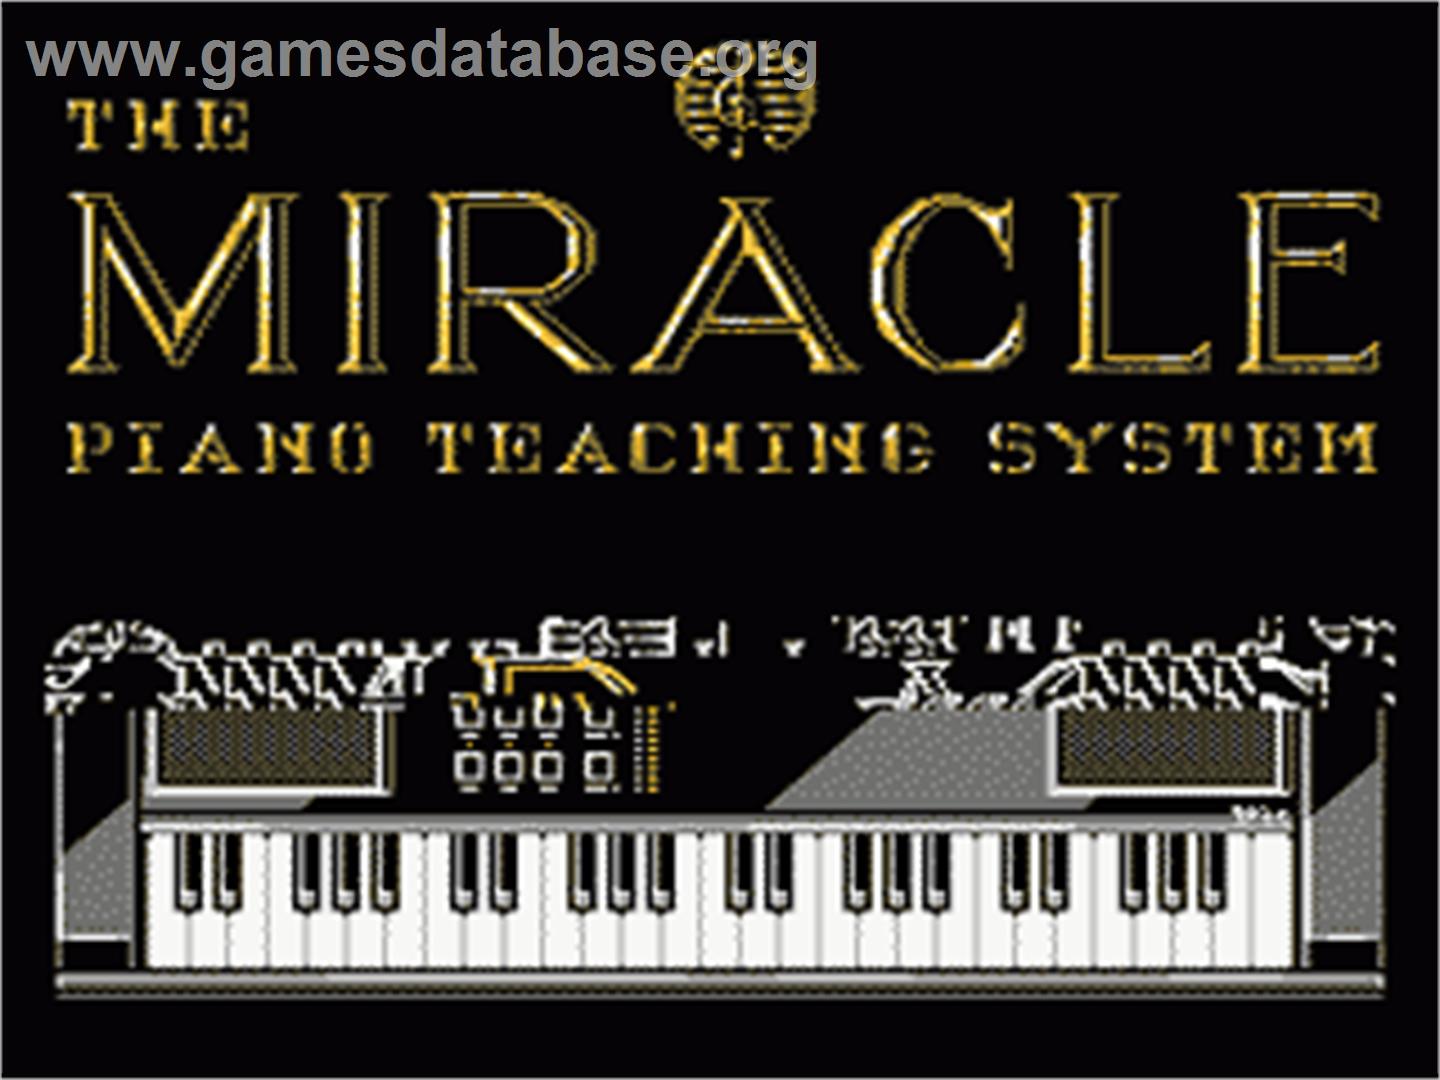 Miracle Piano Teaching System - Nintendo NES - Artwork - Title Screen